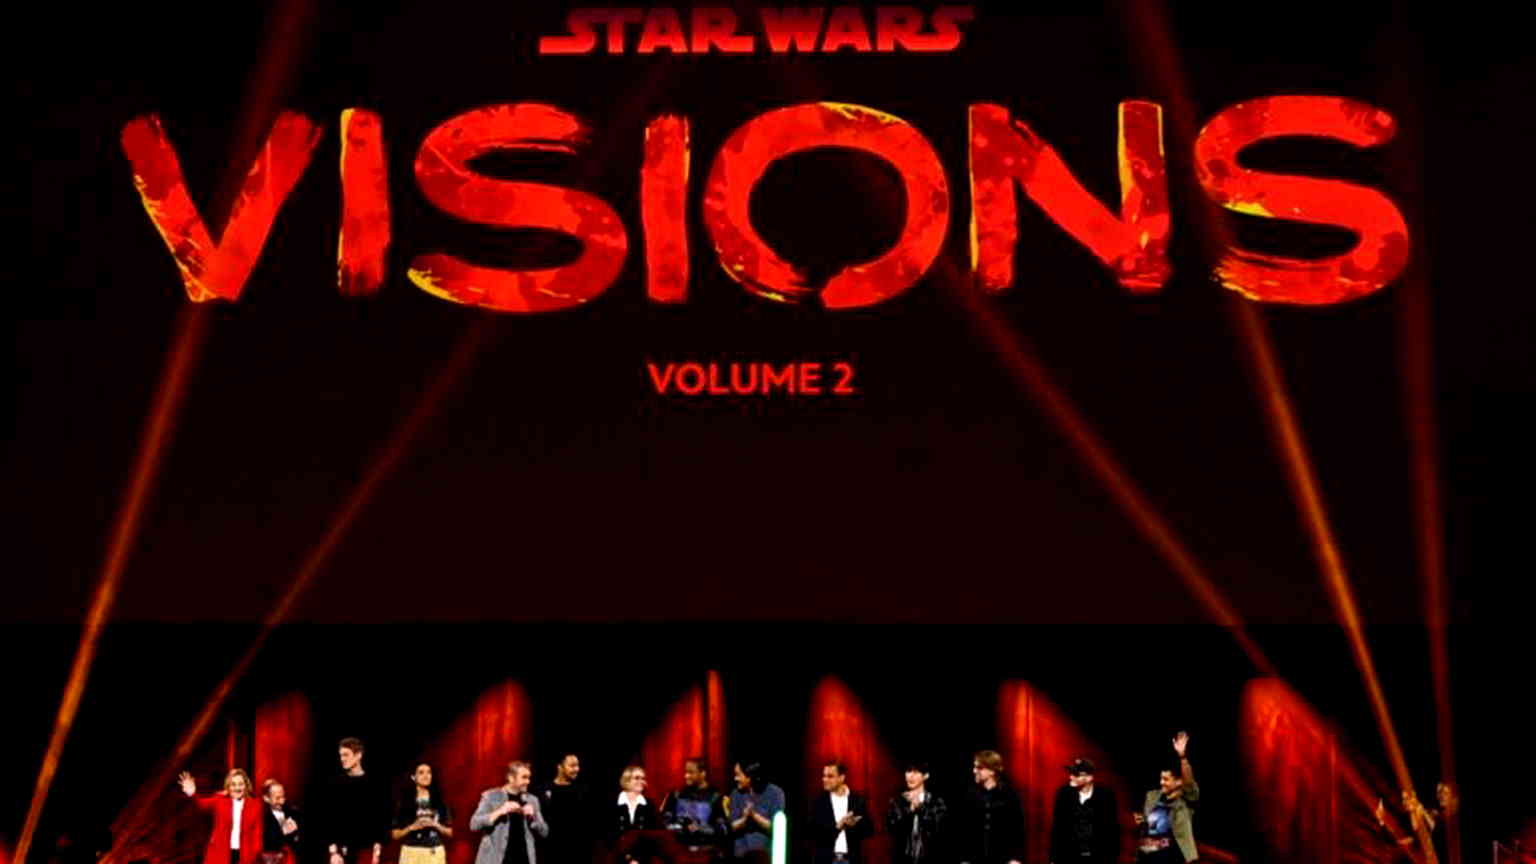 ‘Star Wars: Visions’ second season to feature all-Asian casts from S. Korea, India